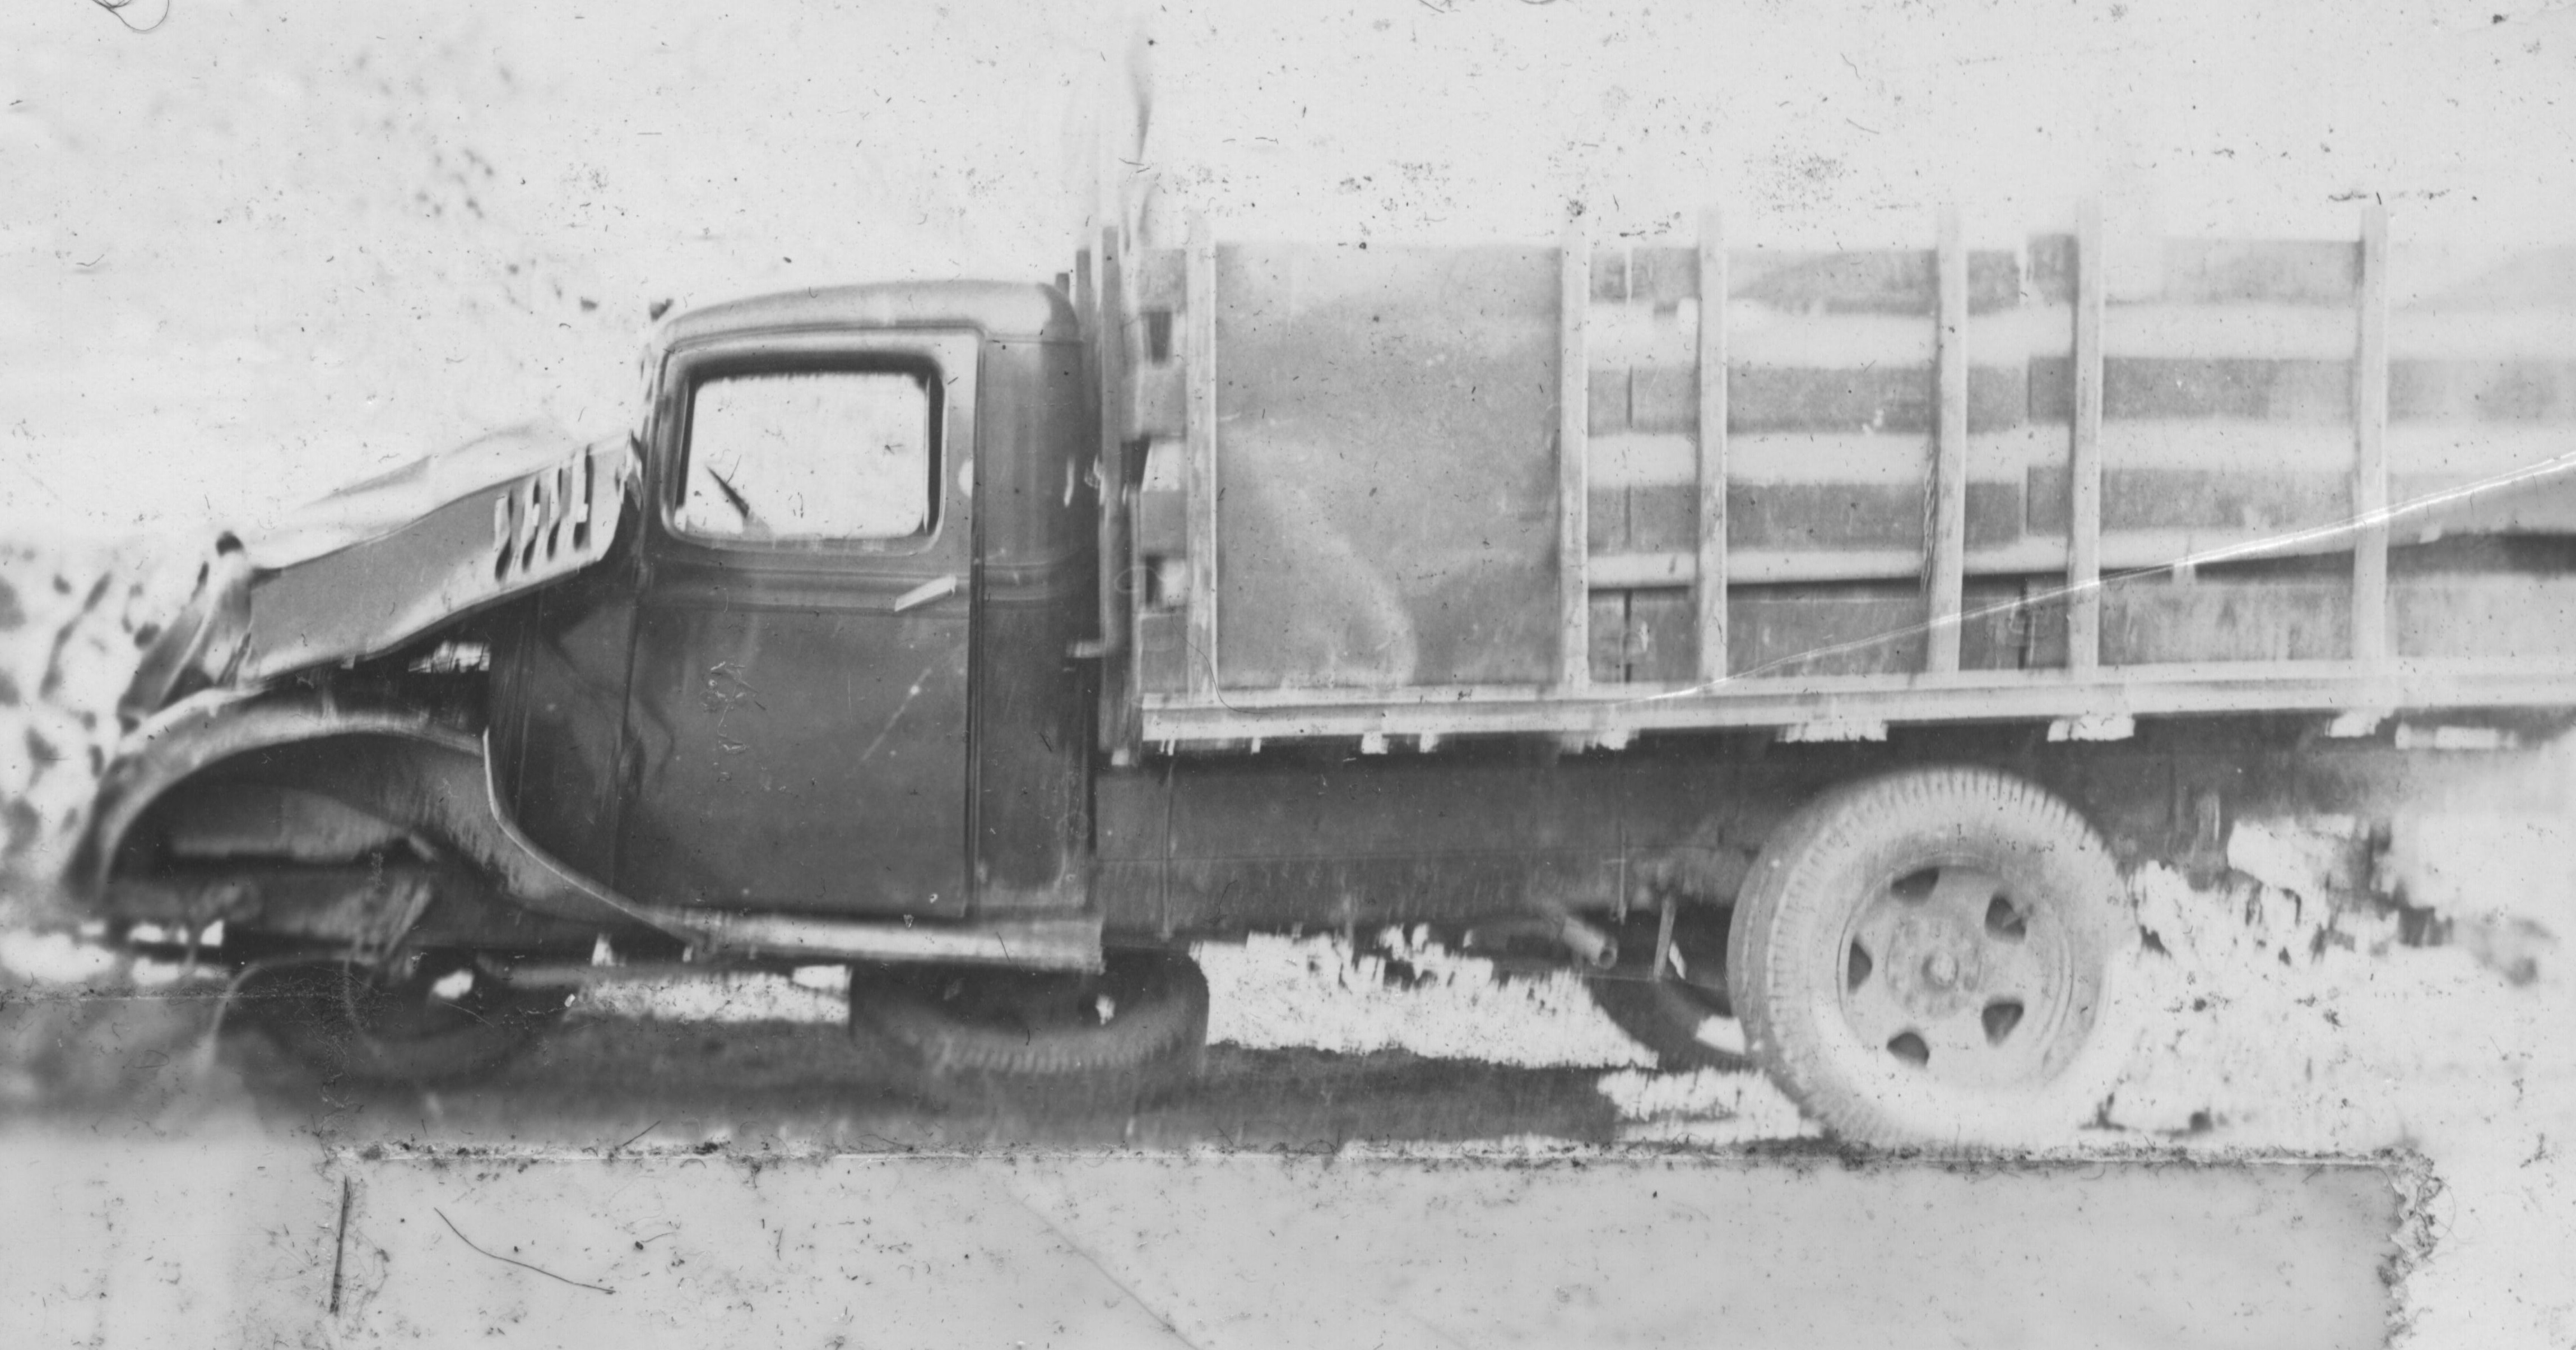 A CCC camp truck at the Leeds CCC Camp after hitting a mule